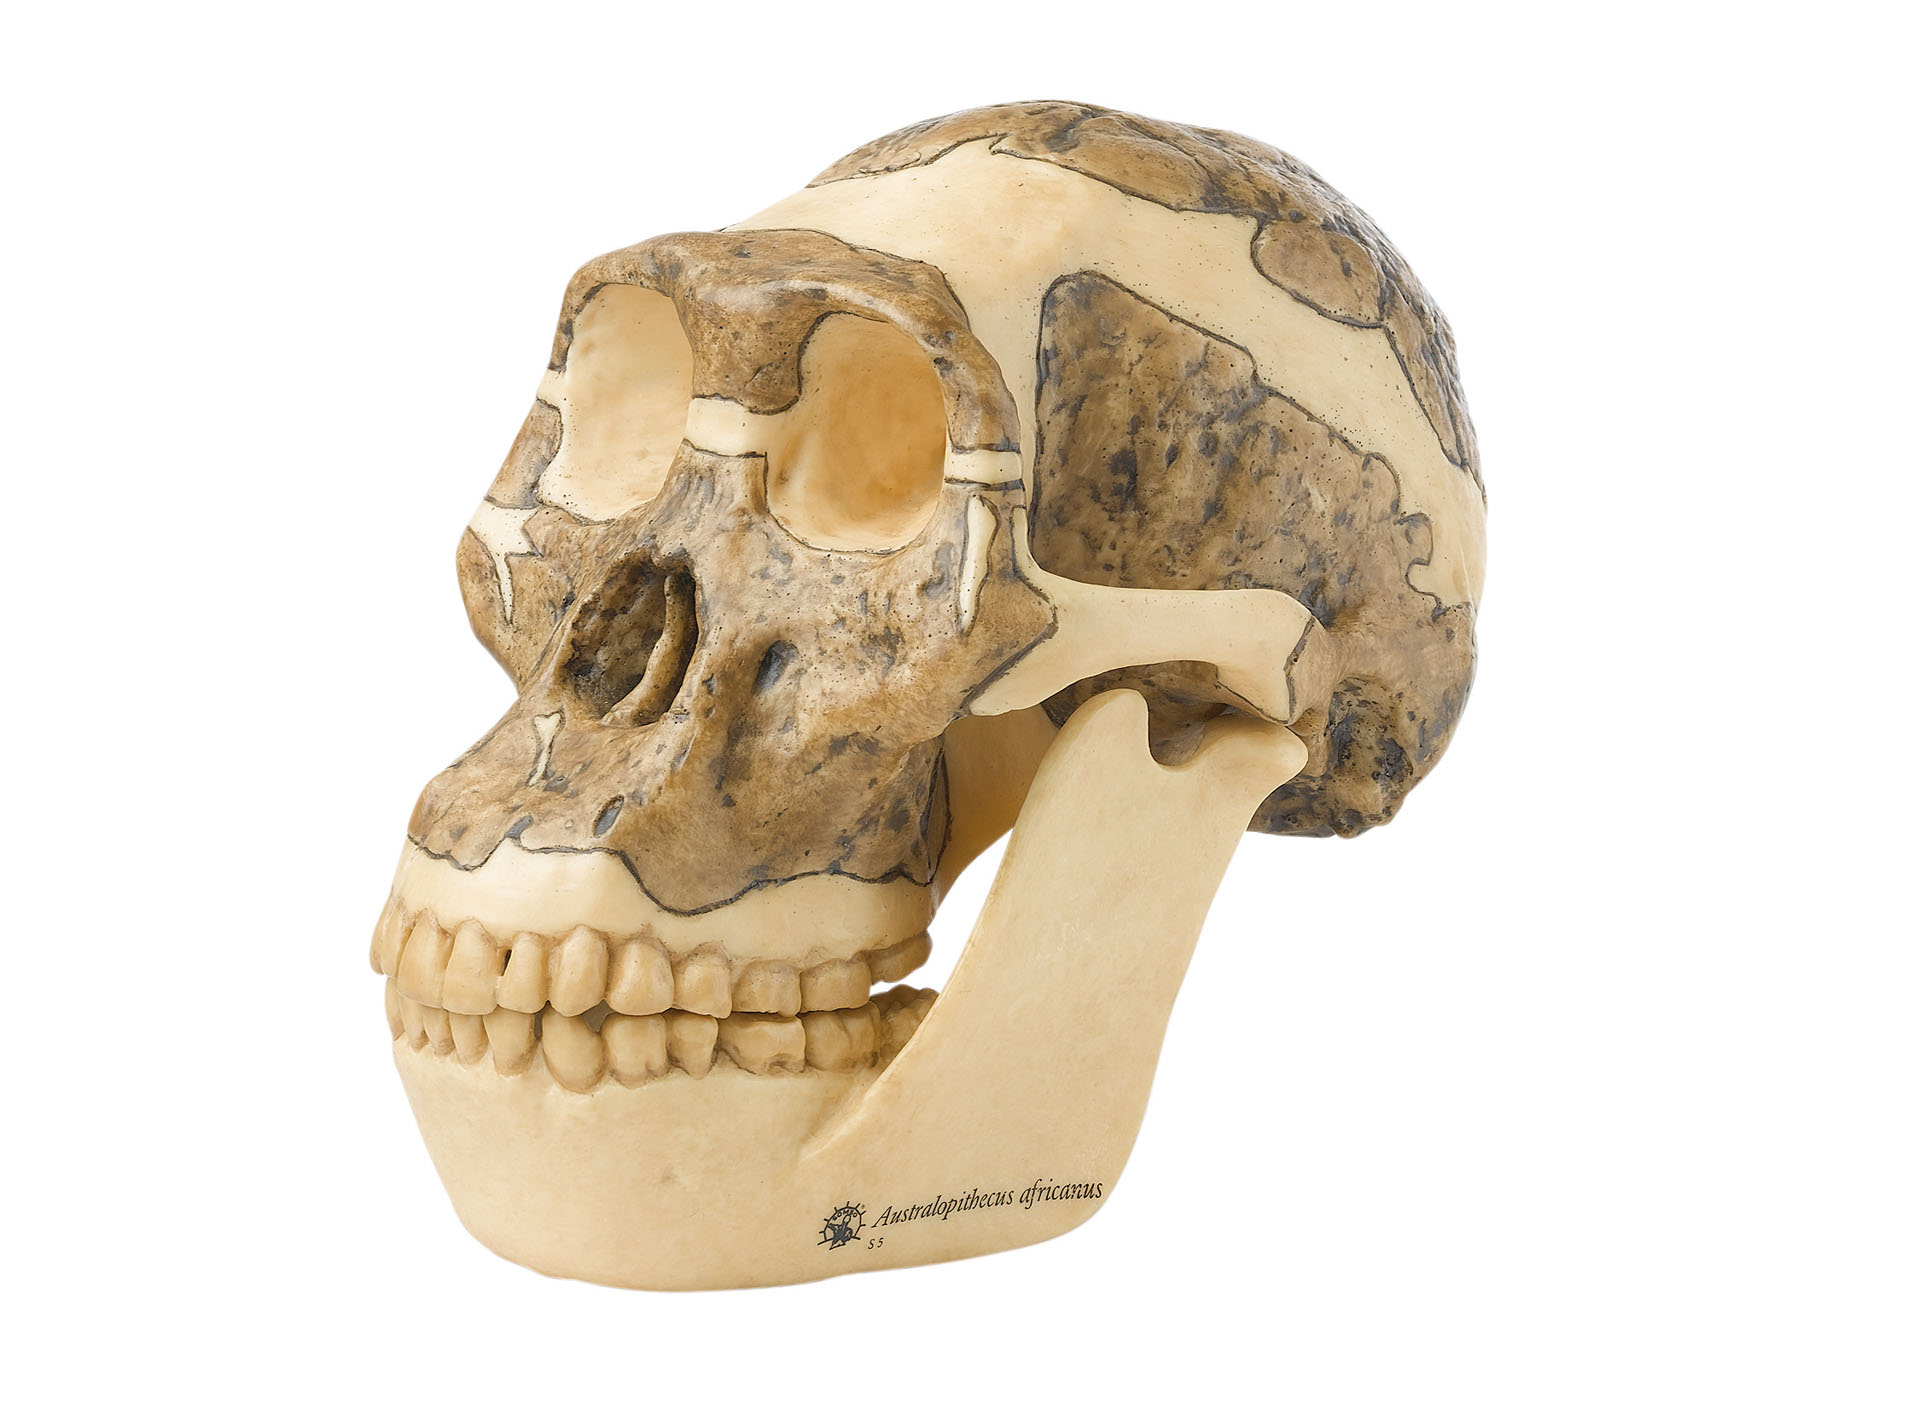 Reconstruction of a Skull of Australopithecus Africanus